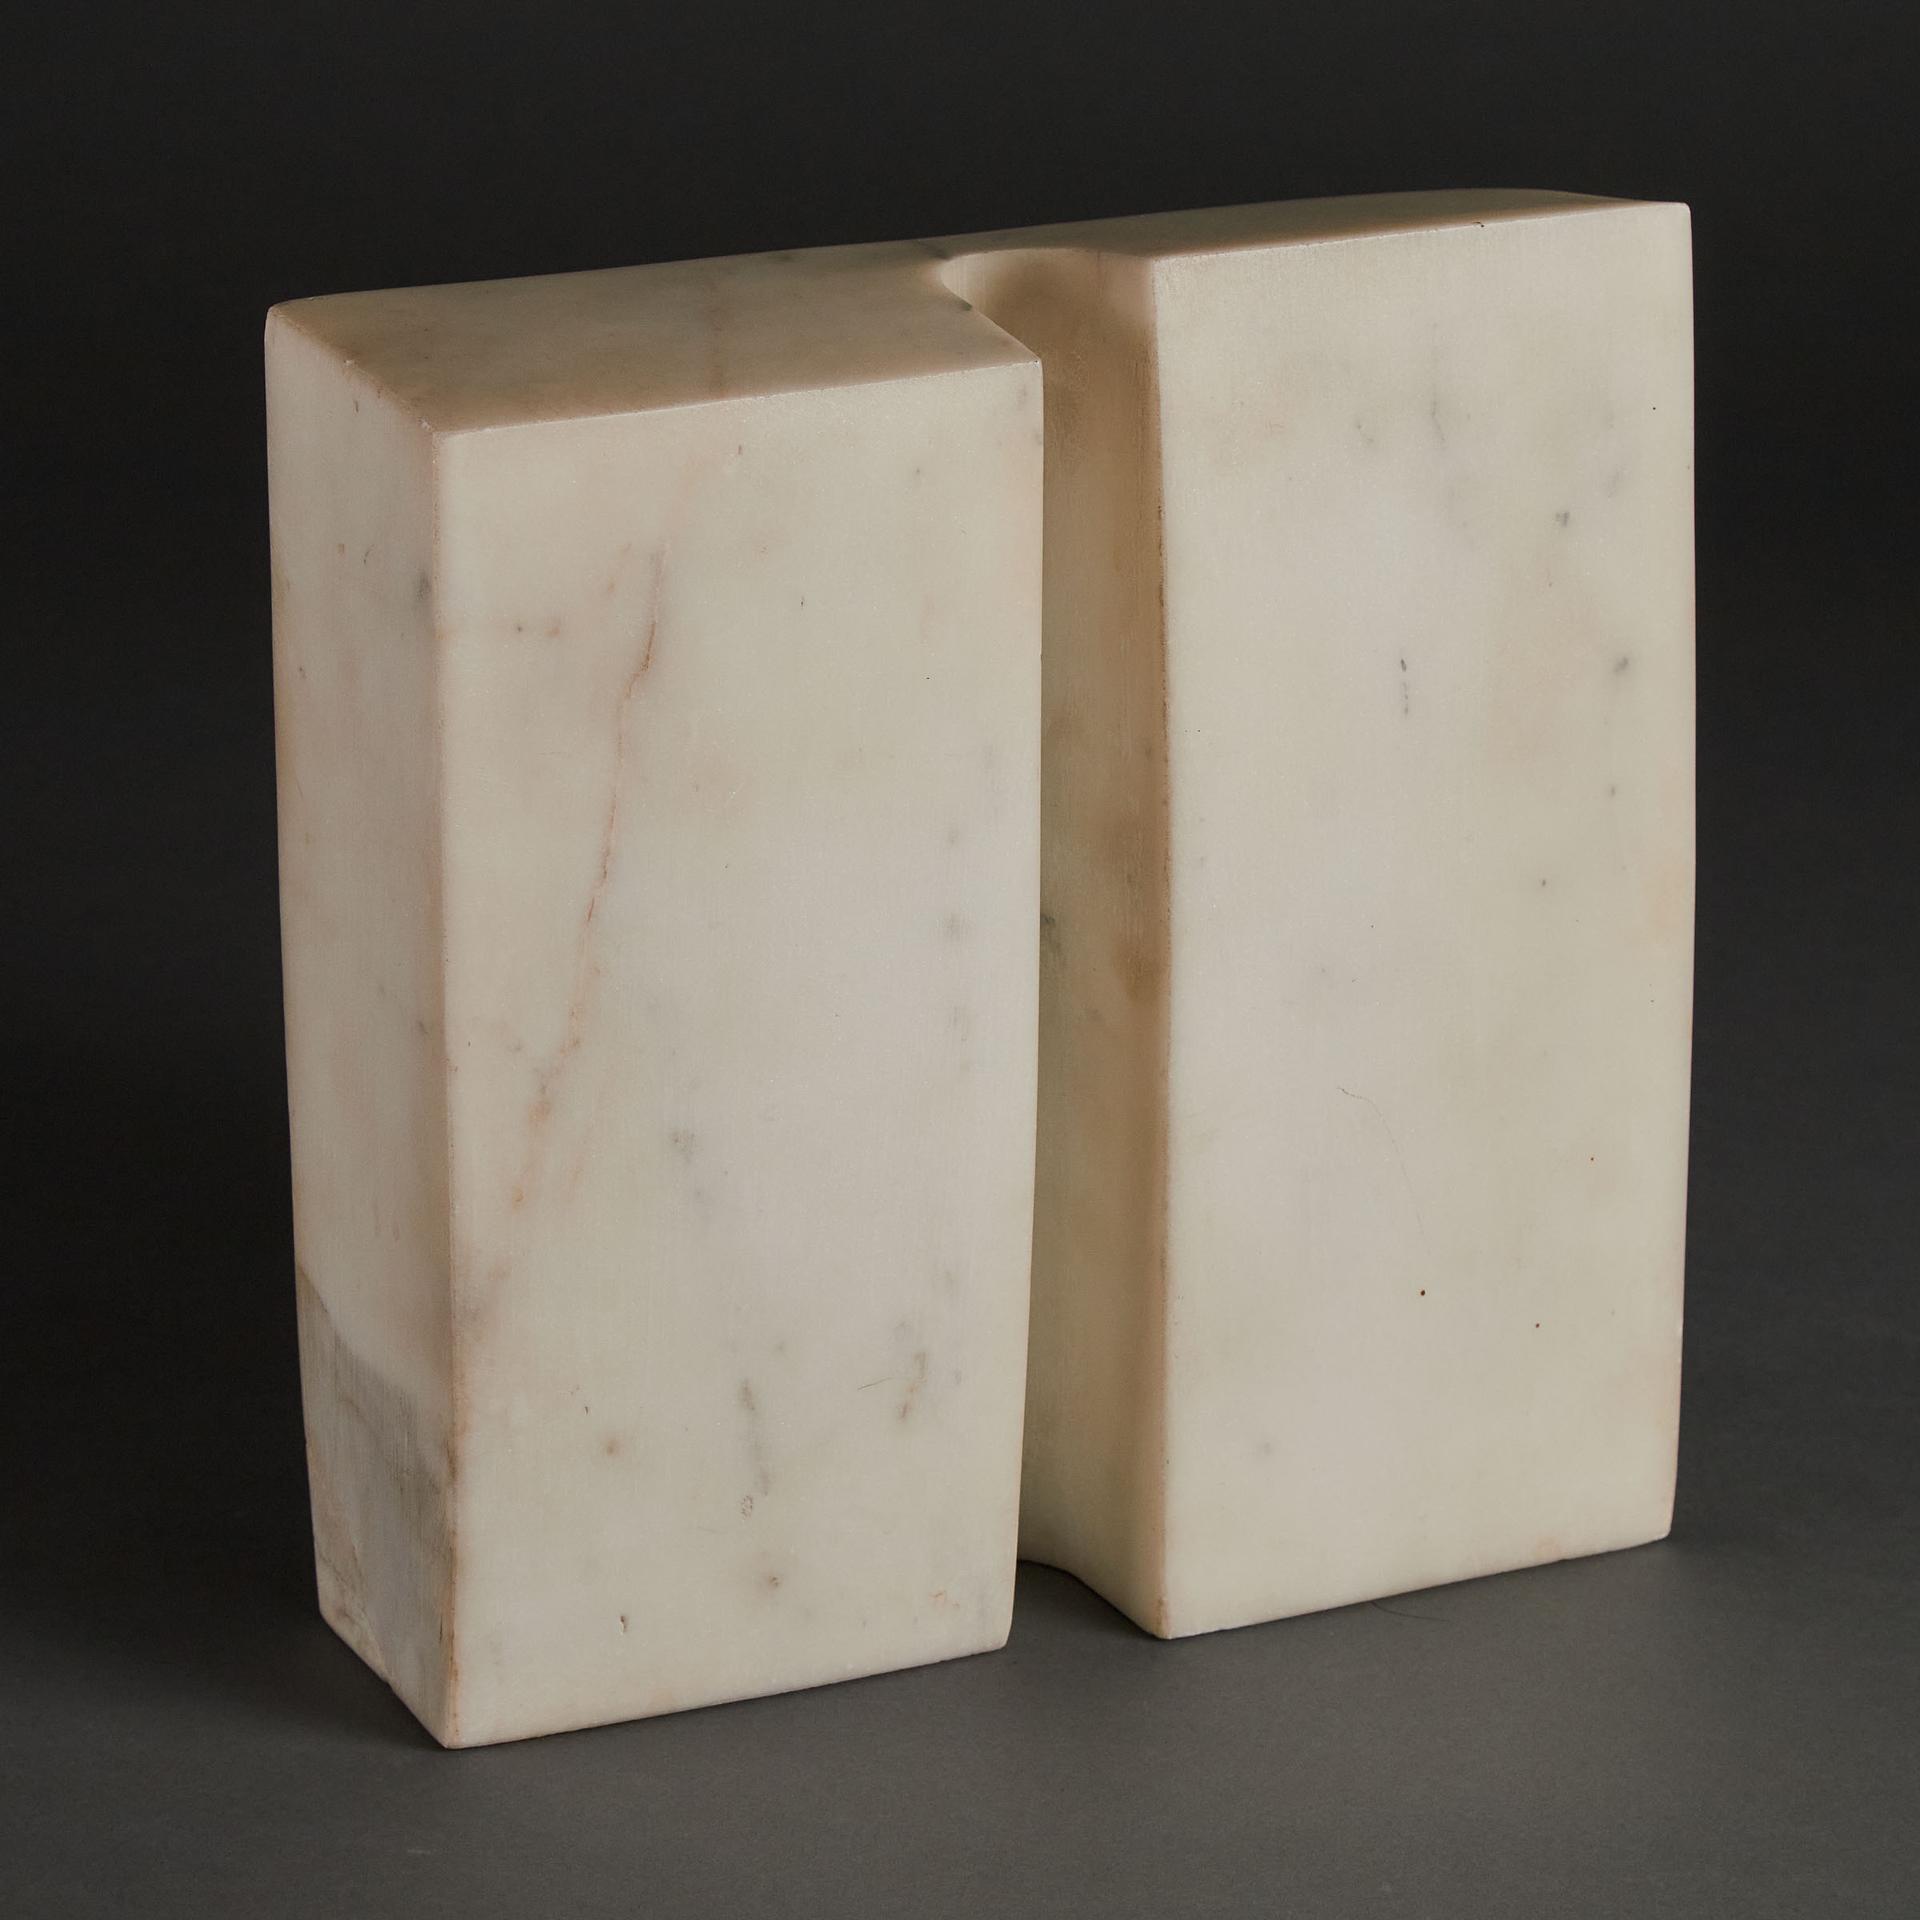 Kosso Eloul (1920-1995) - Untitled (Vertical Notch, White Marble)